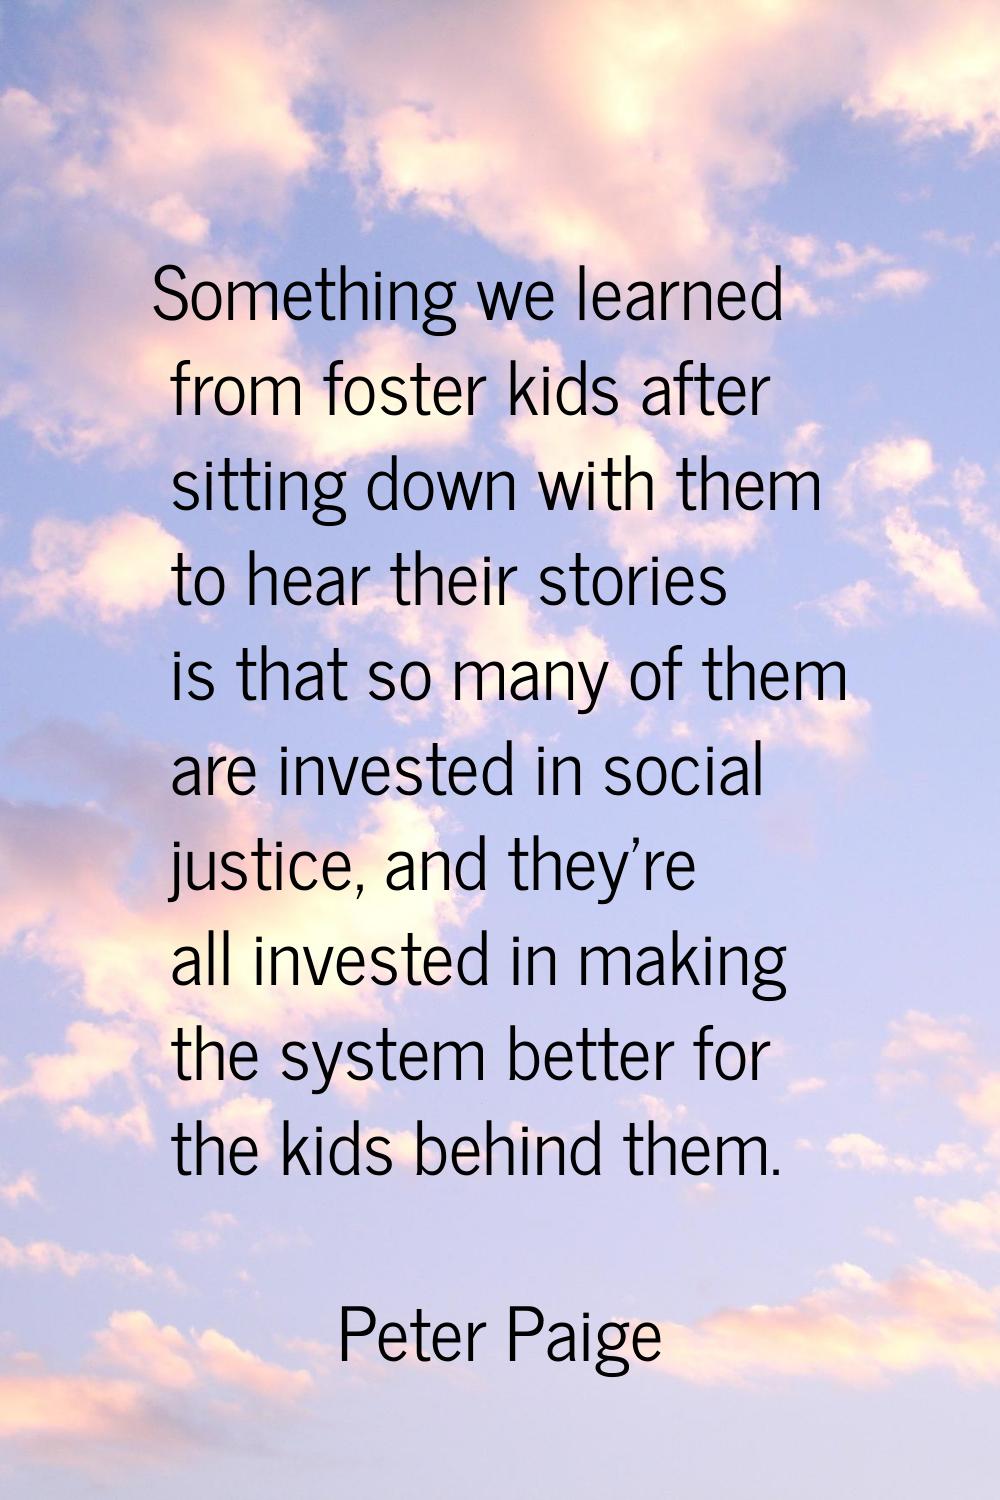 Something we learned from foster kids after sitting down with them to hear their stories is that so